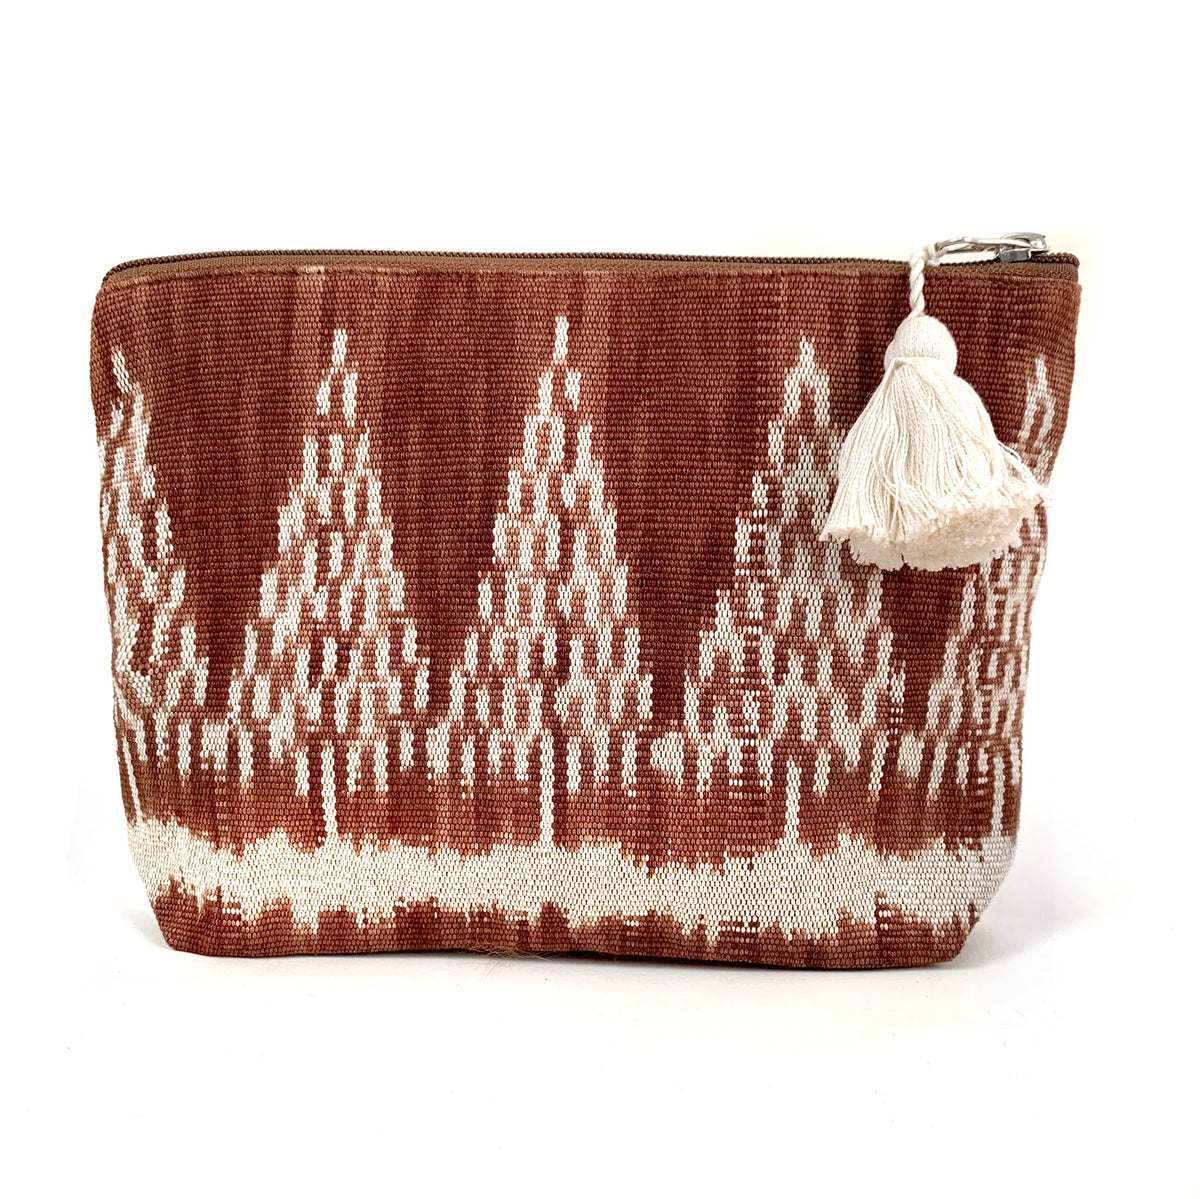 Natural dye cosmetic bag - cafe